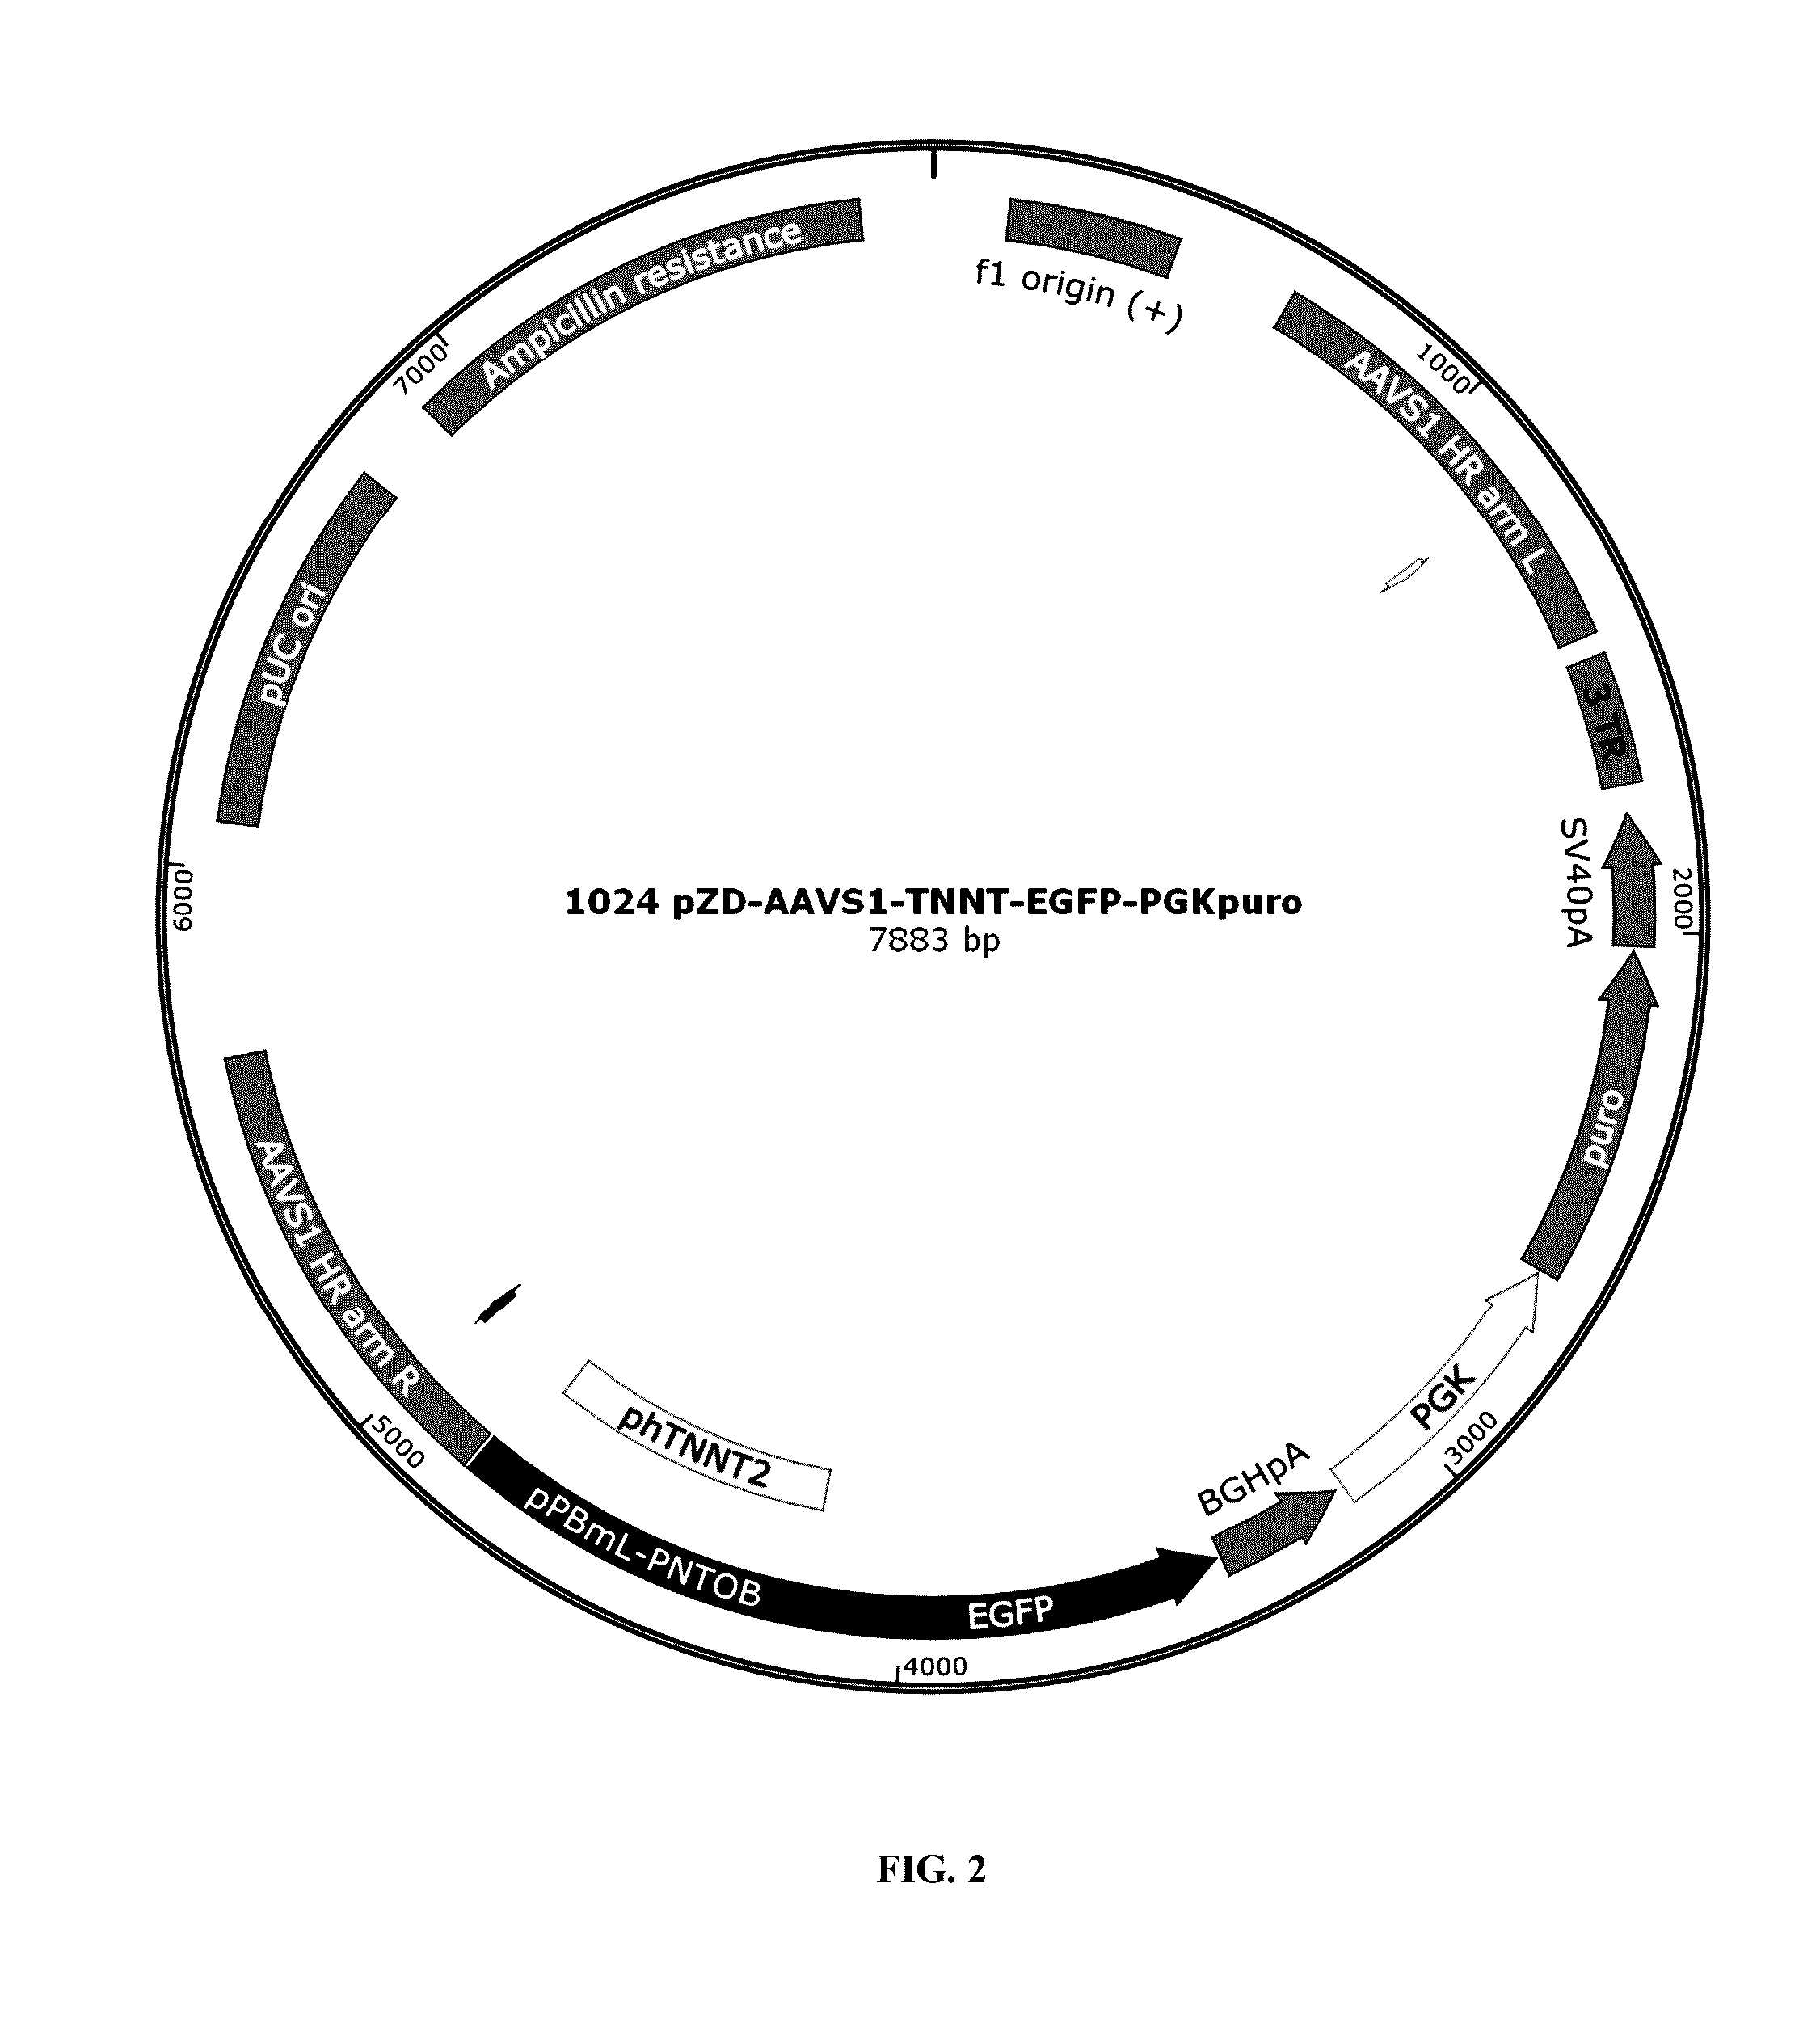 Methods for cell reprogramming and genome engineering